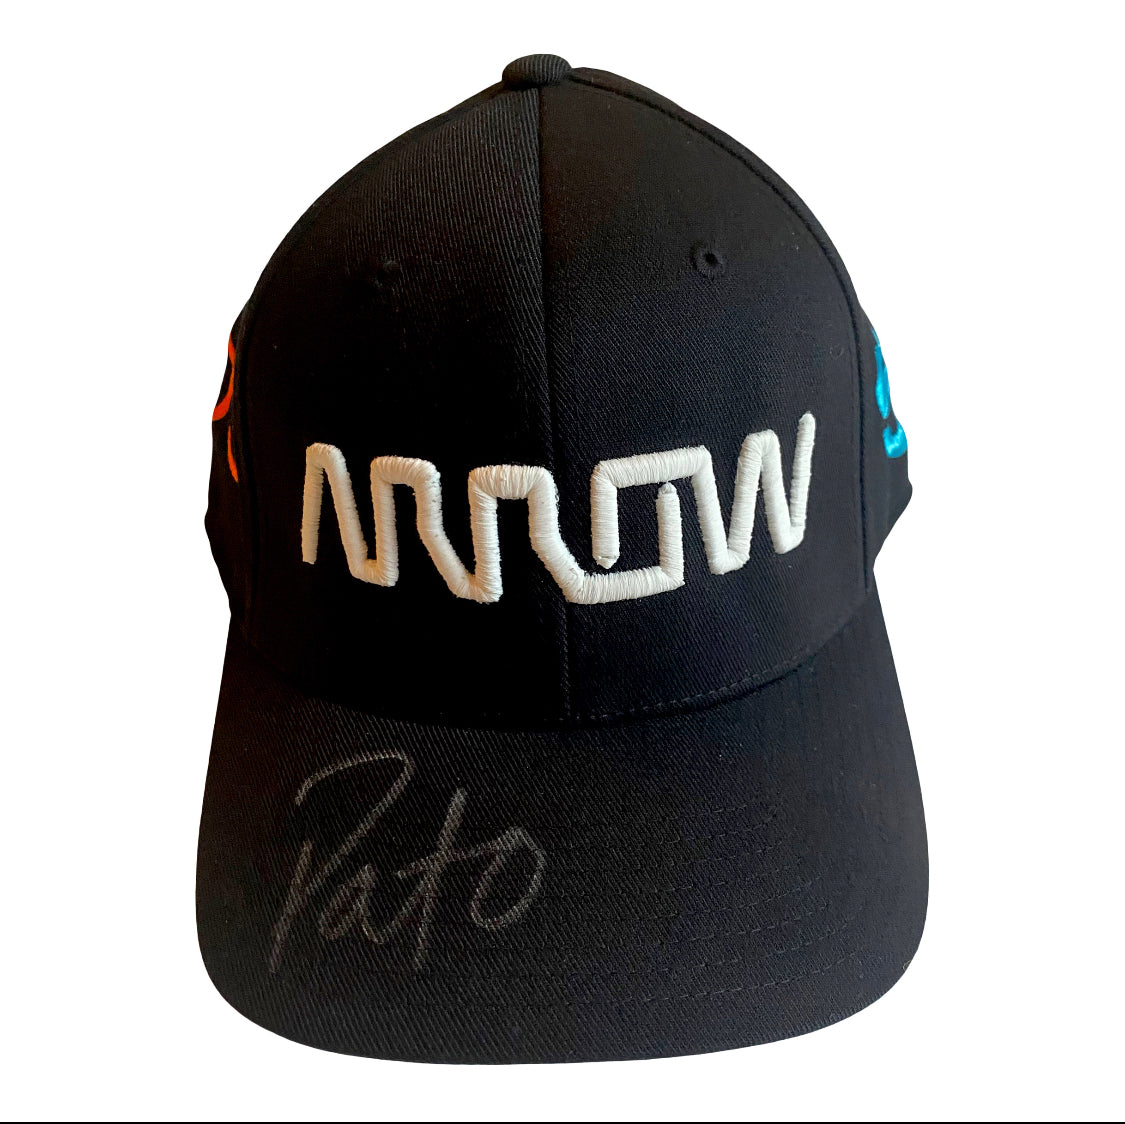 *Autographed* Black Curved Bill Cap with ARROW logo in front and Neon PO logo on side